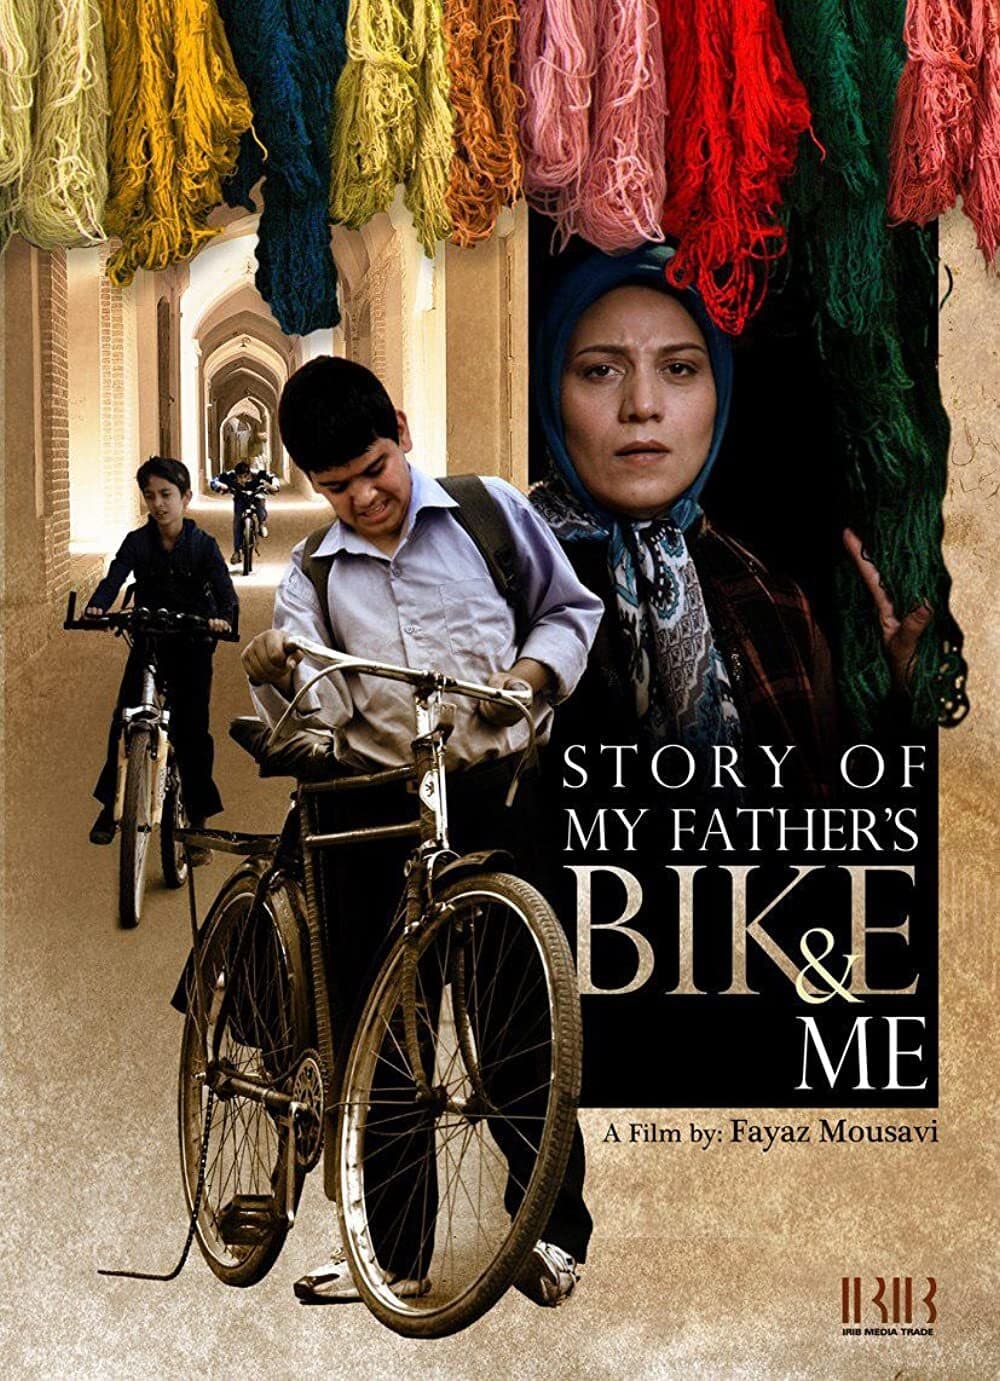 Story of My Father's Bike & Me